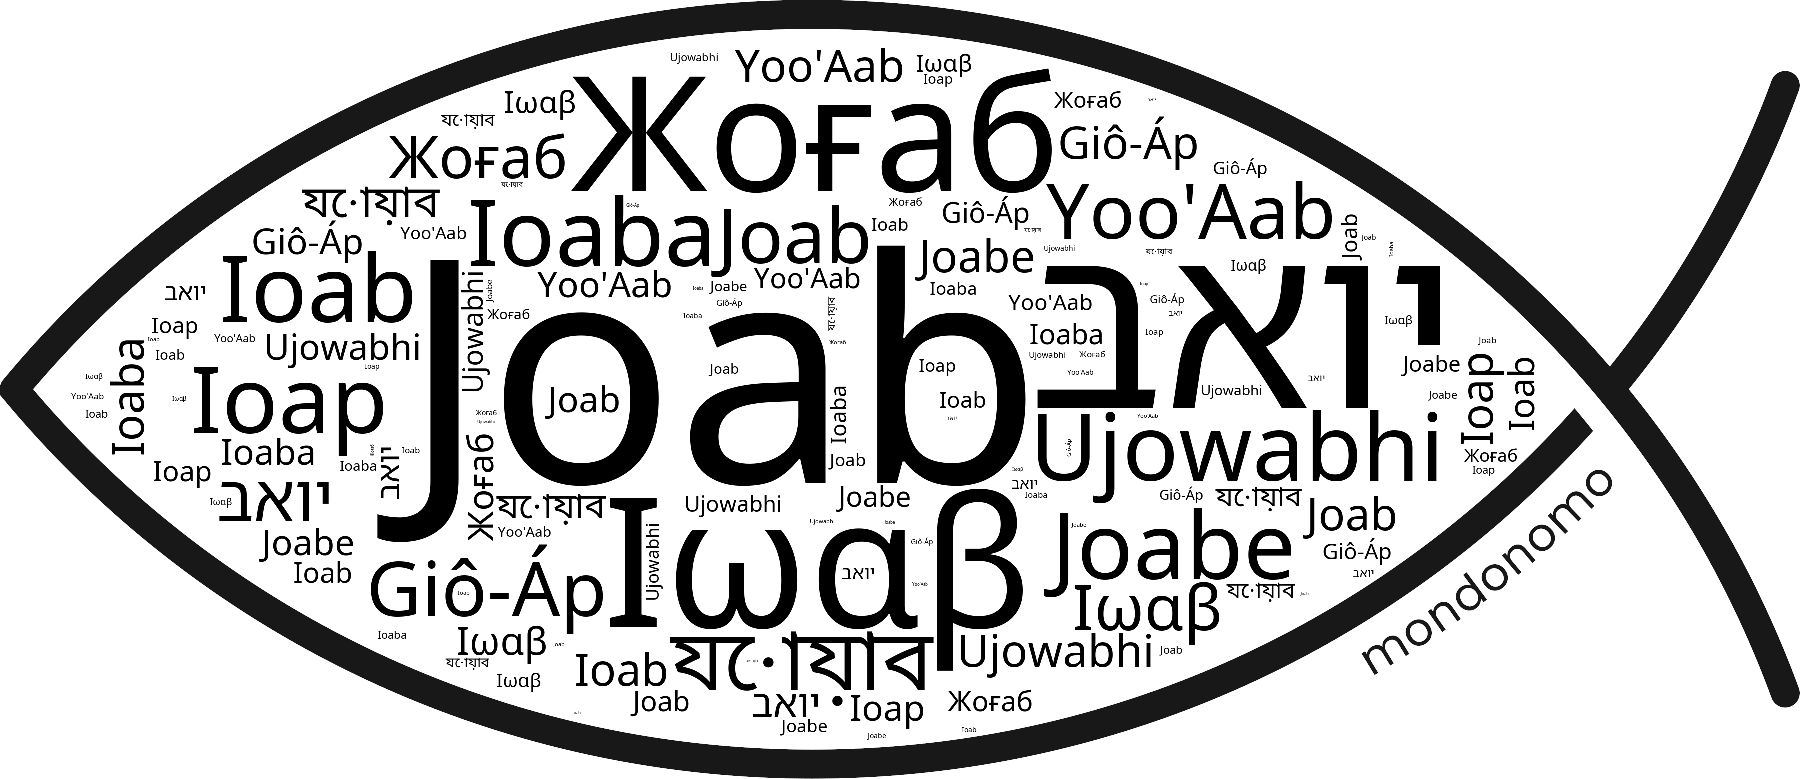 Name Joab in the world's Bibles